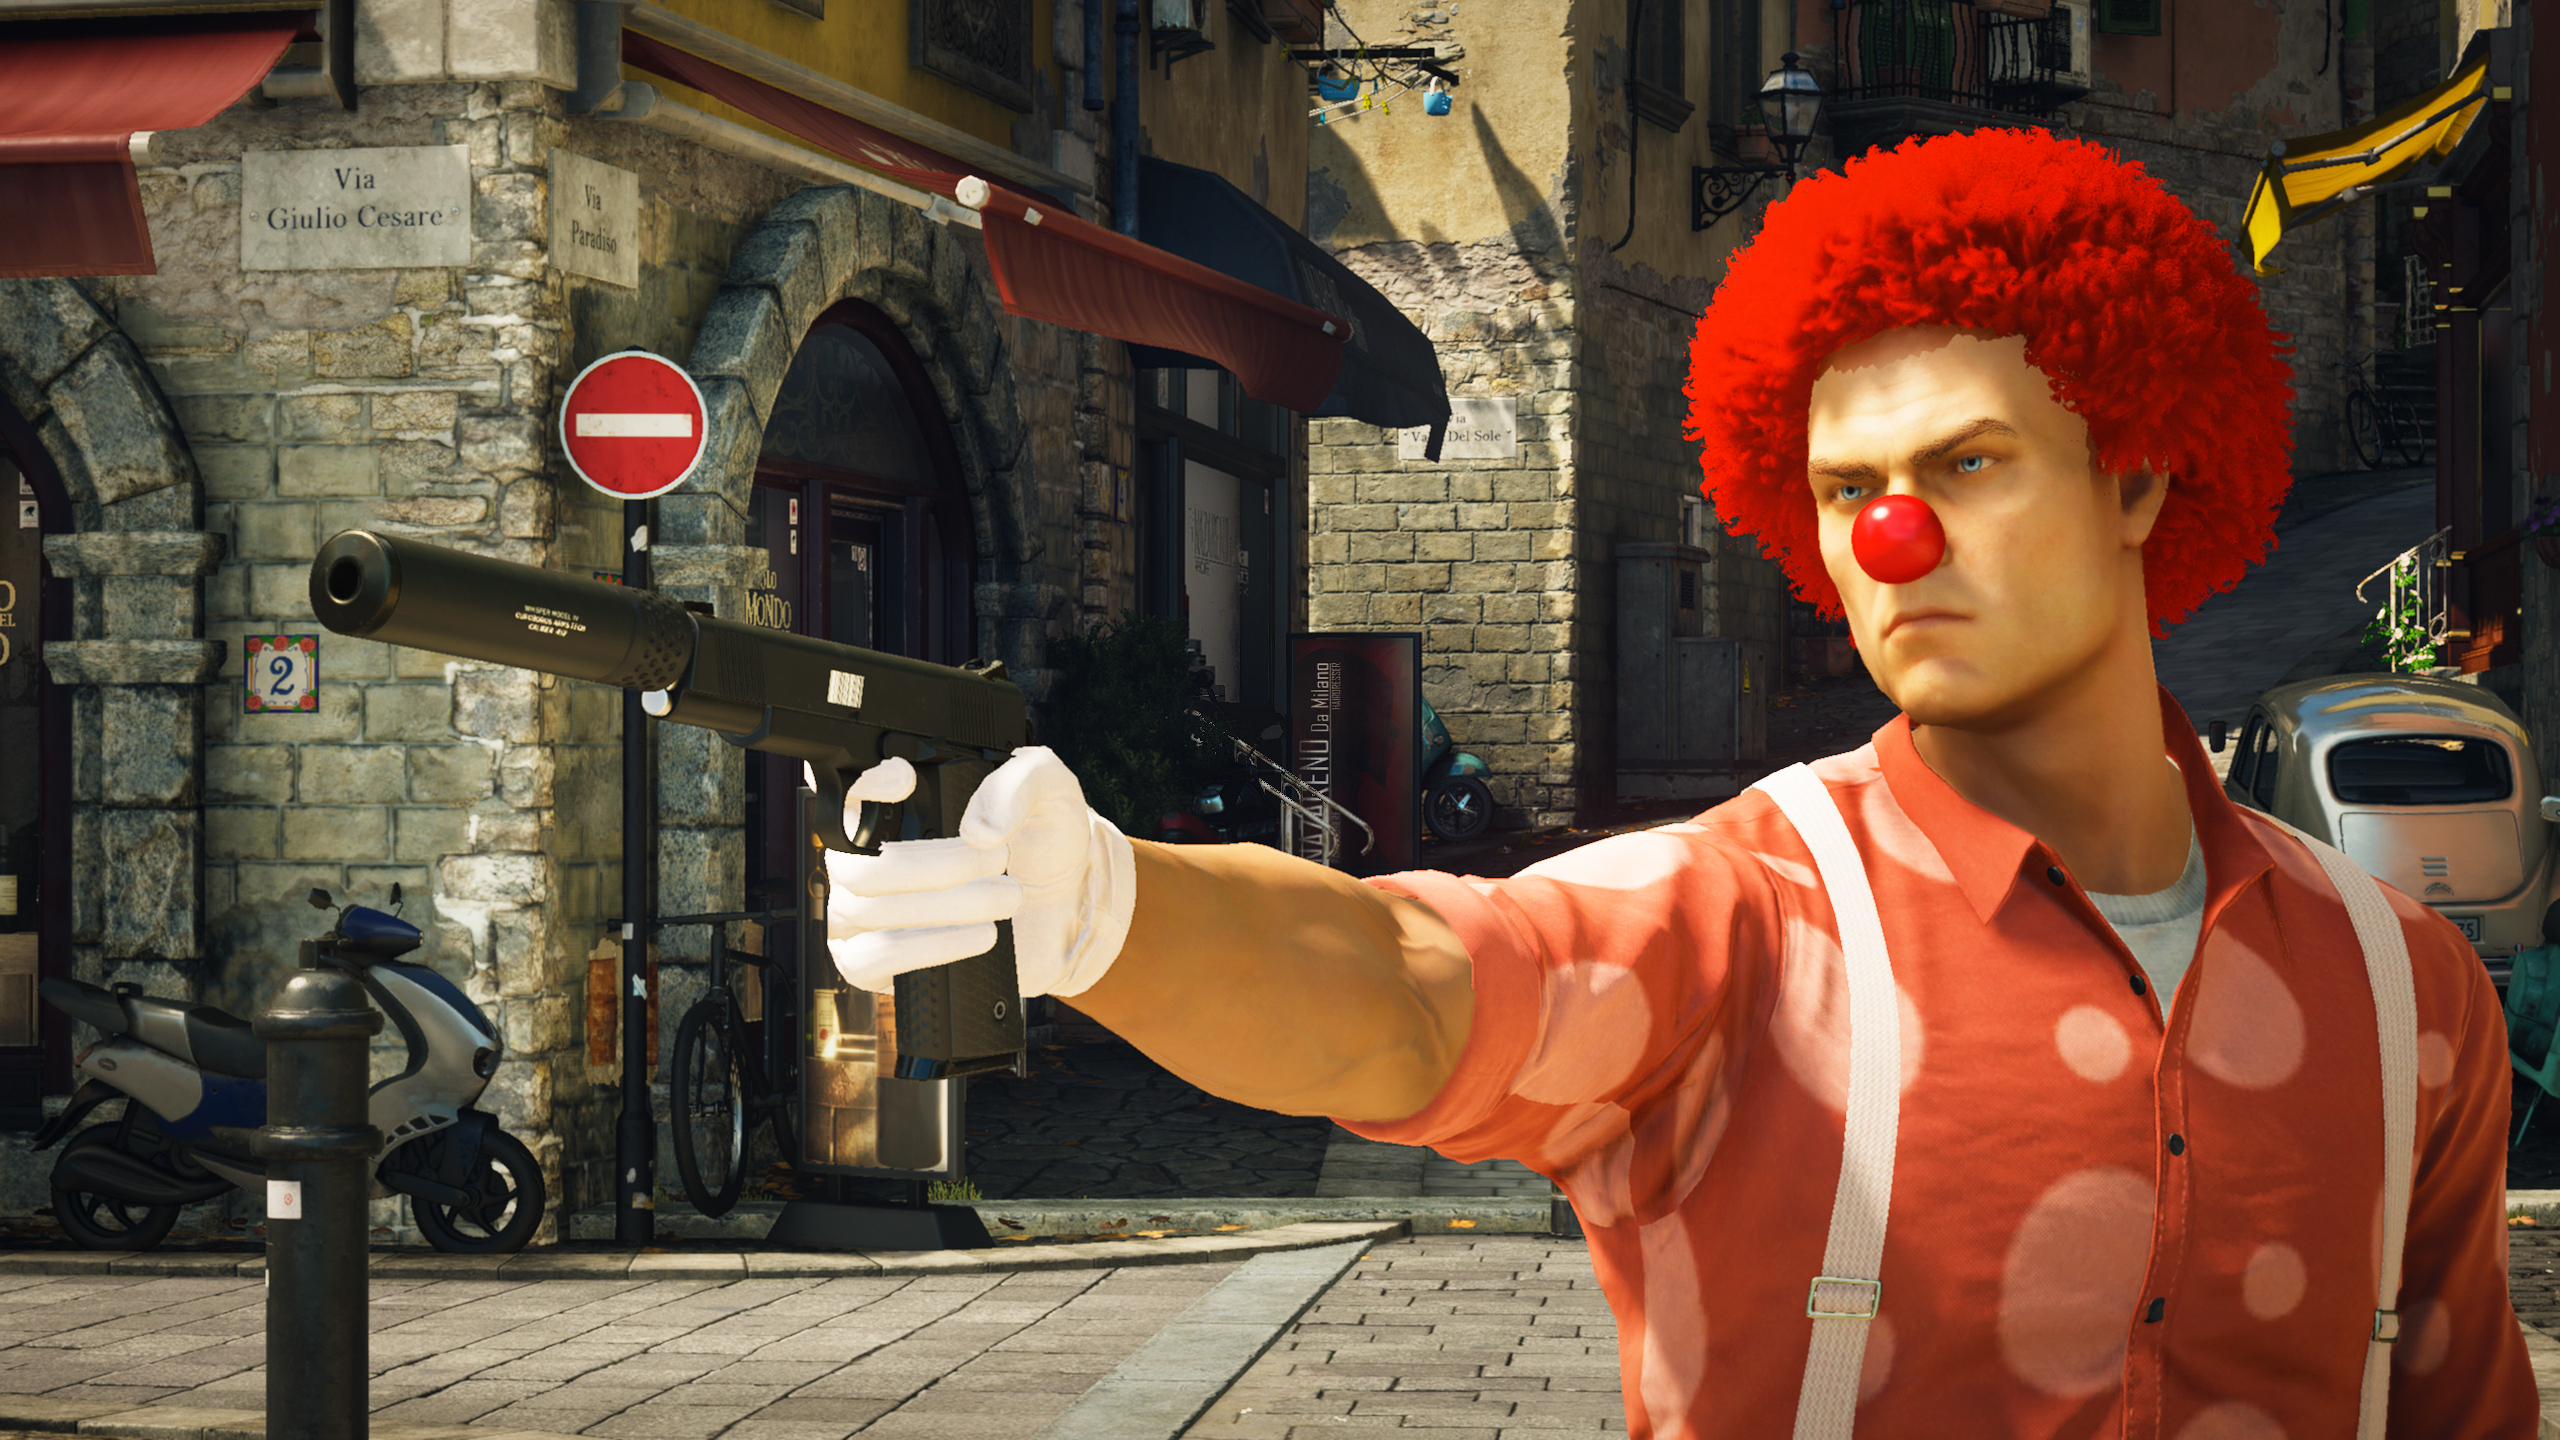 Agent 47 the clown